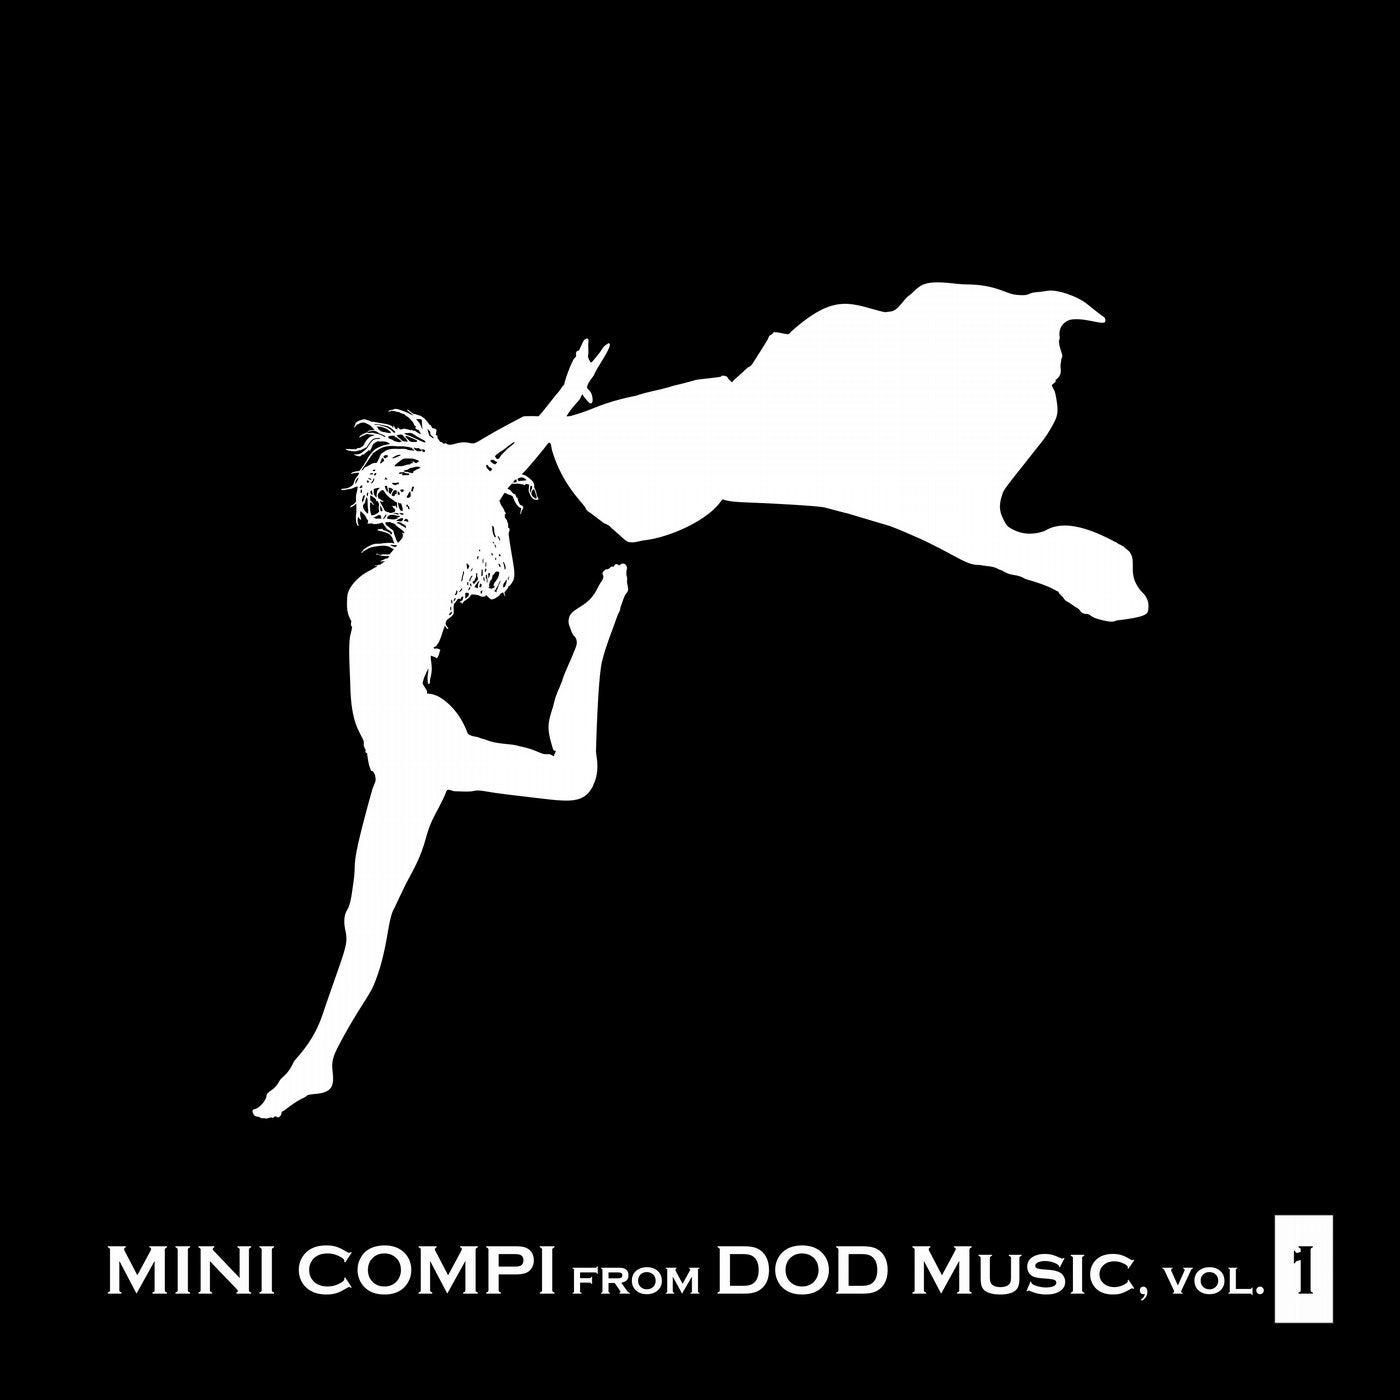 Mini Compi From DOD Music, Vol. 1